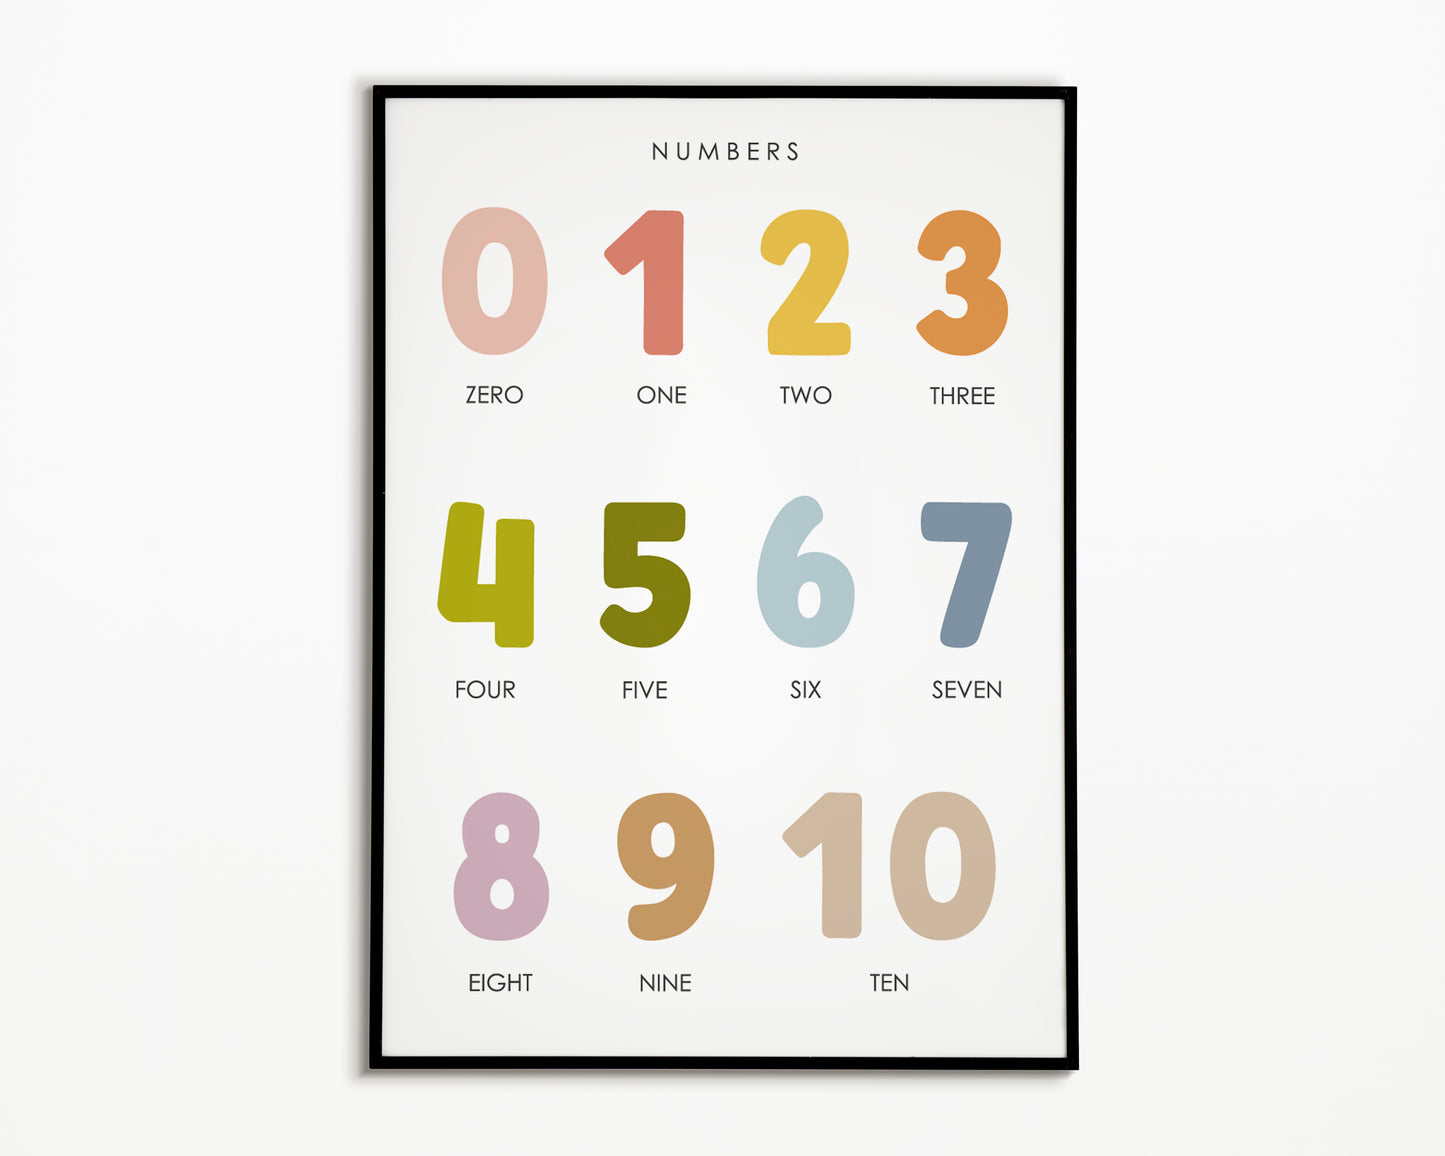 Colorful Educational Posters: Numbers, Shapes, & Alphabet